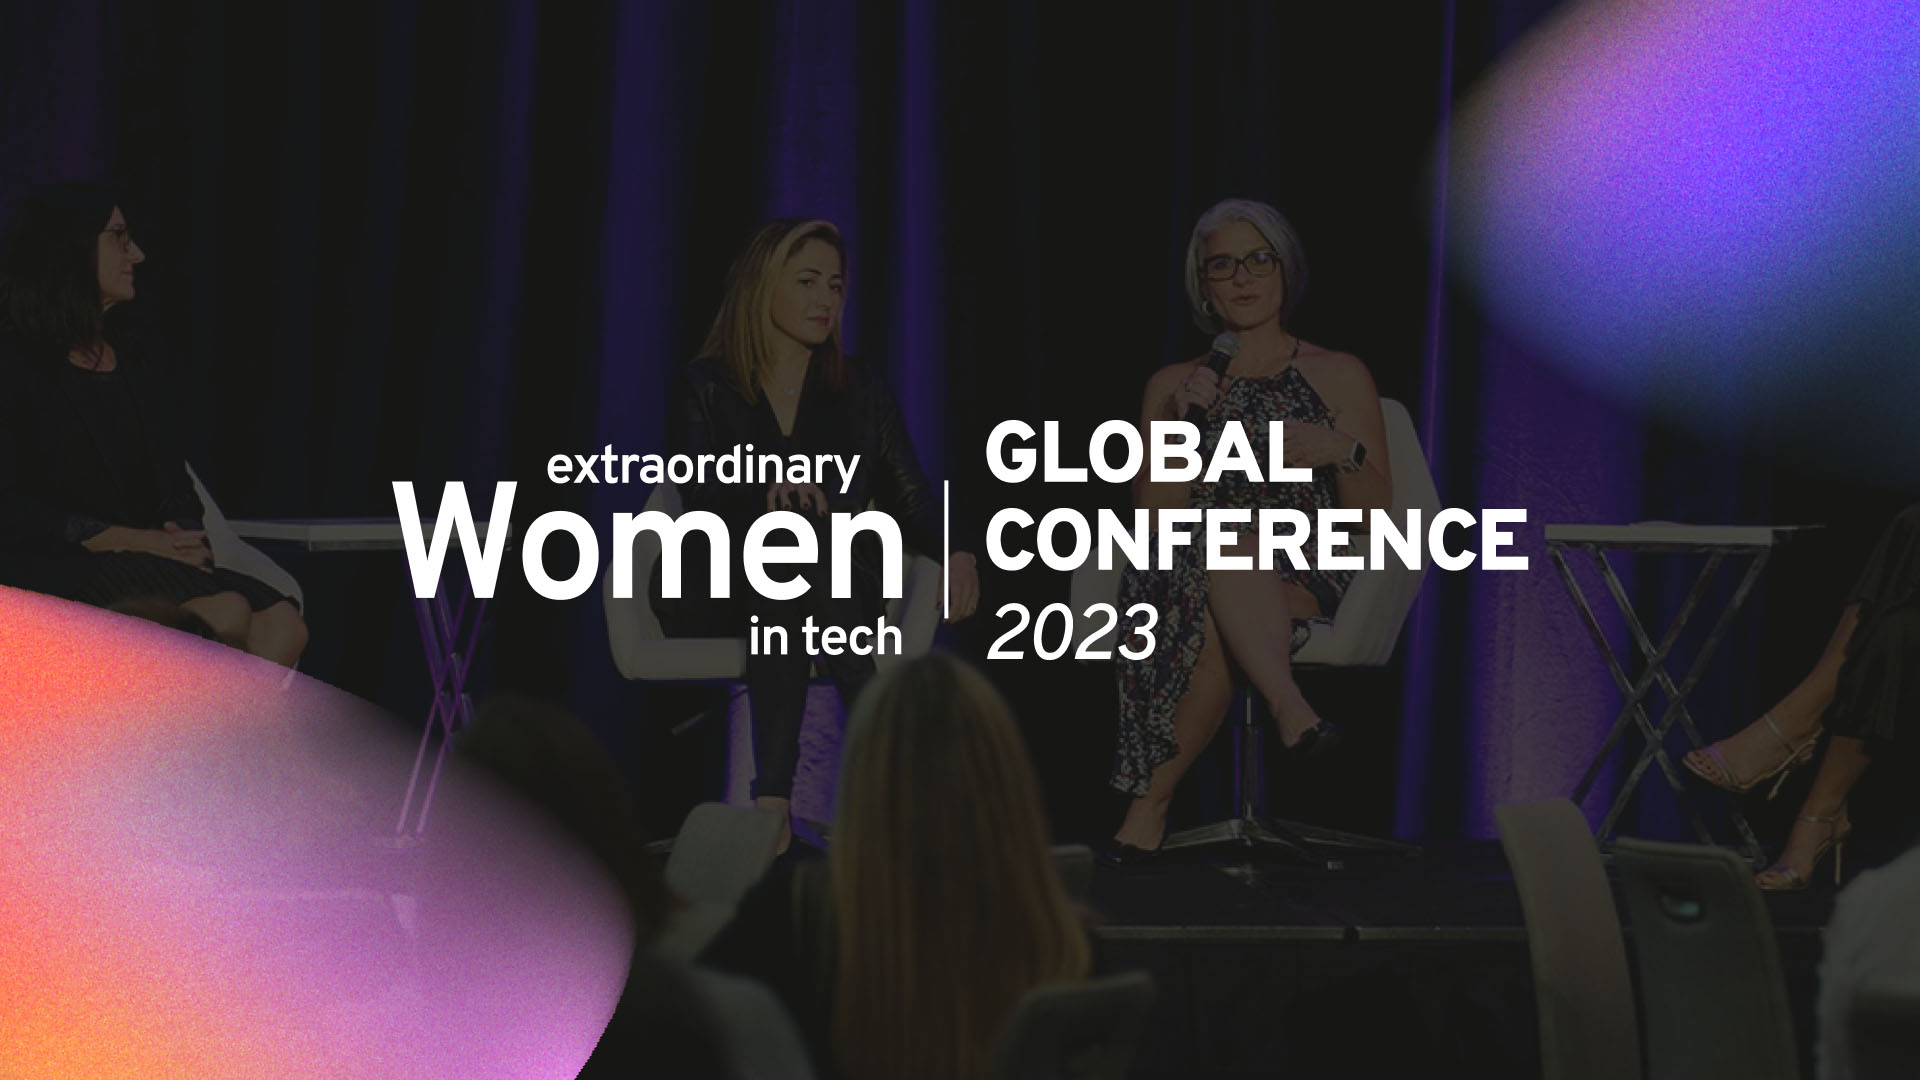 Global Conference 2023 Extraordinary Women In Tech